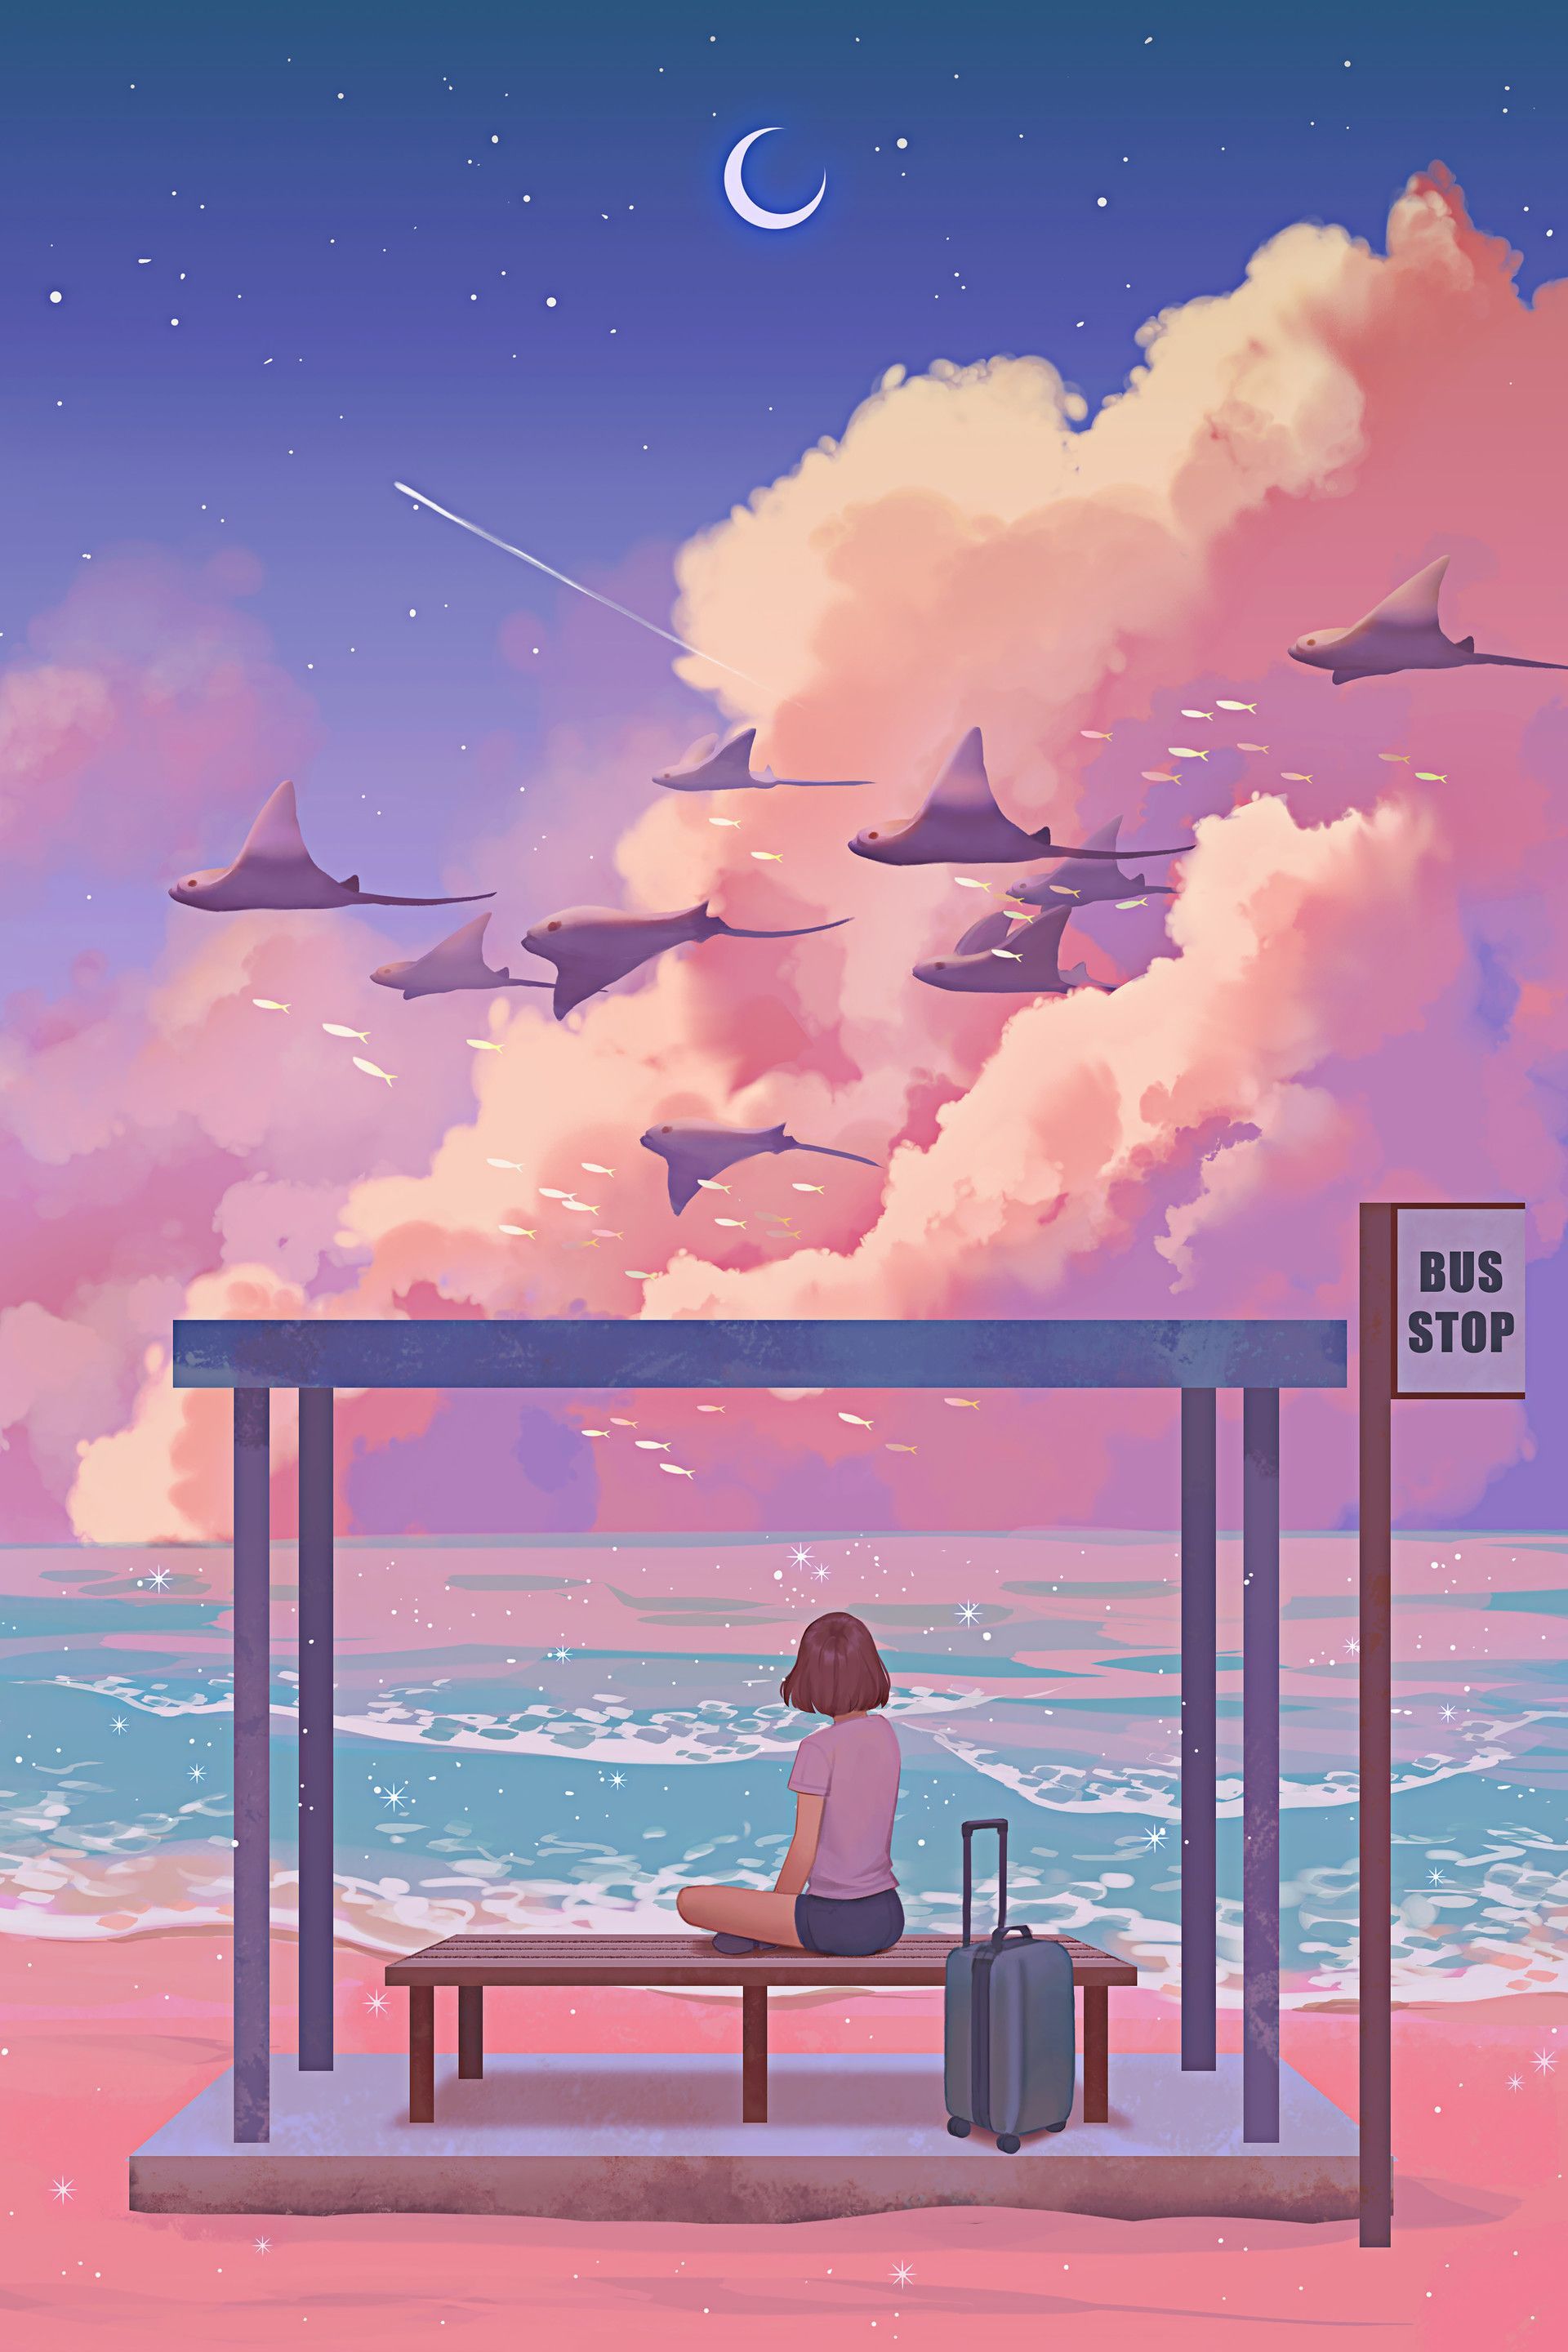 A woman sits on a bench at a bus stop, looking out at the ocean. In the sky, there are a flock of flying fish. - Anime, anime landscape